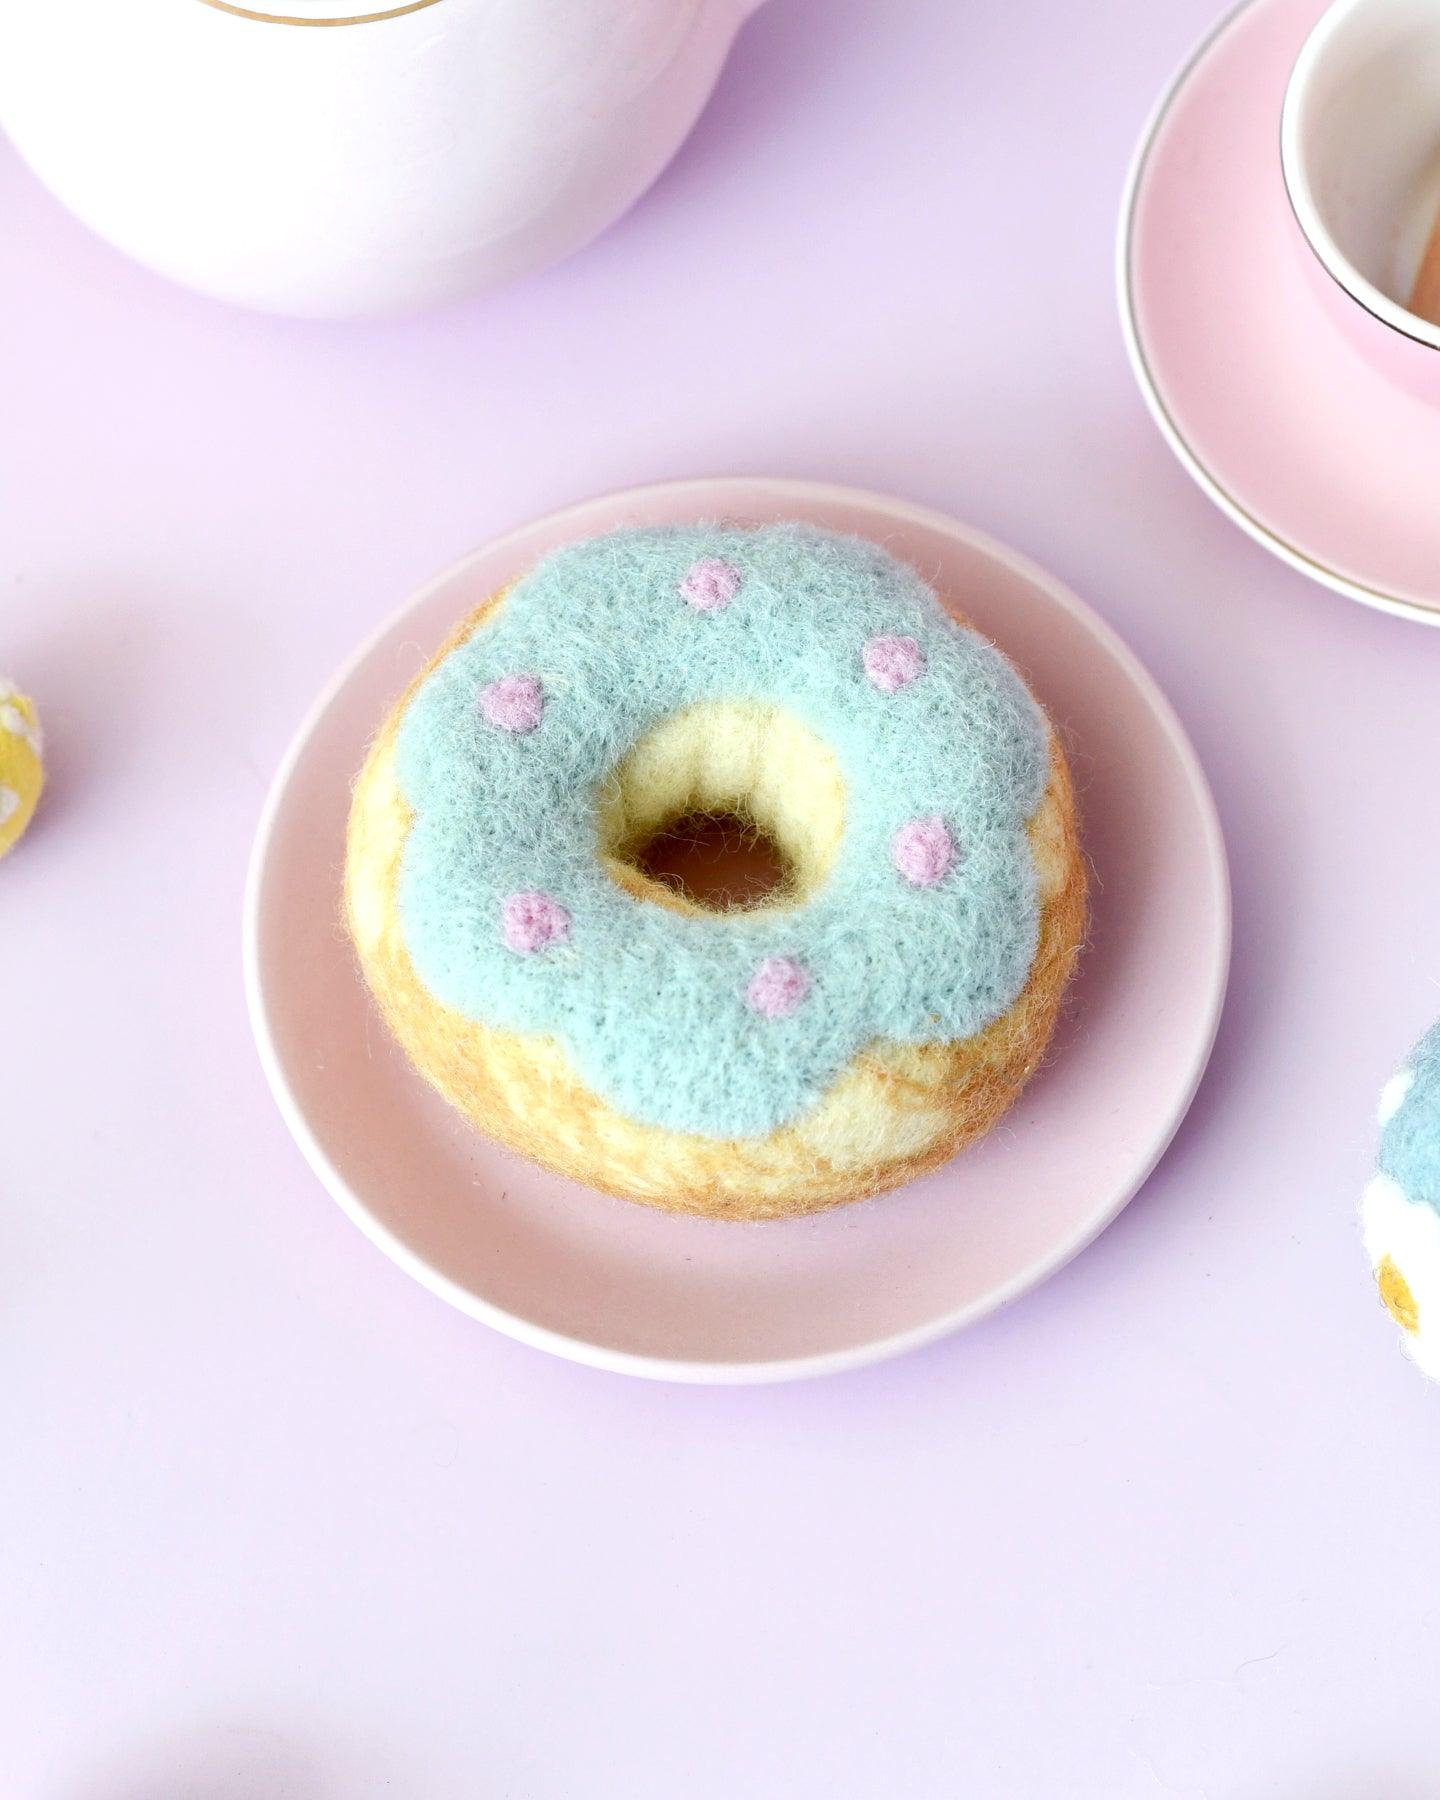 Felt Doughnut (Donut) with Pastel Blue Frosting and Pink Dots - Tara Treasures